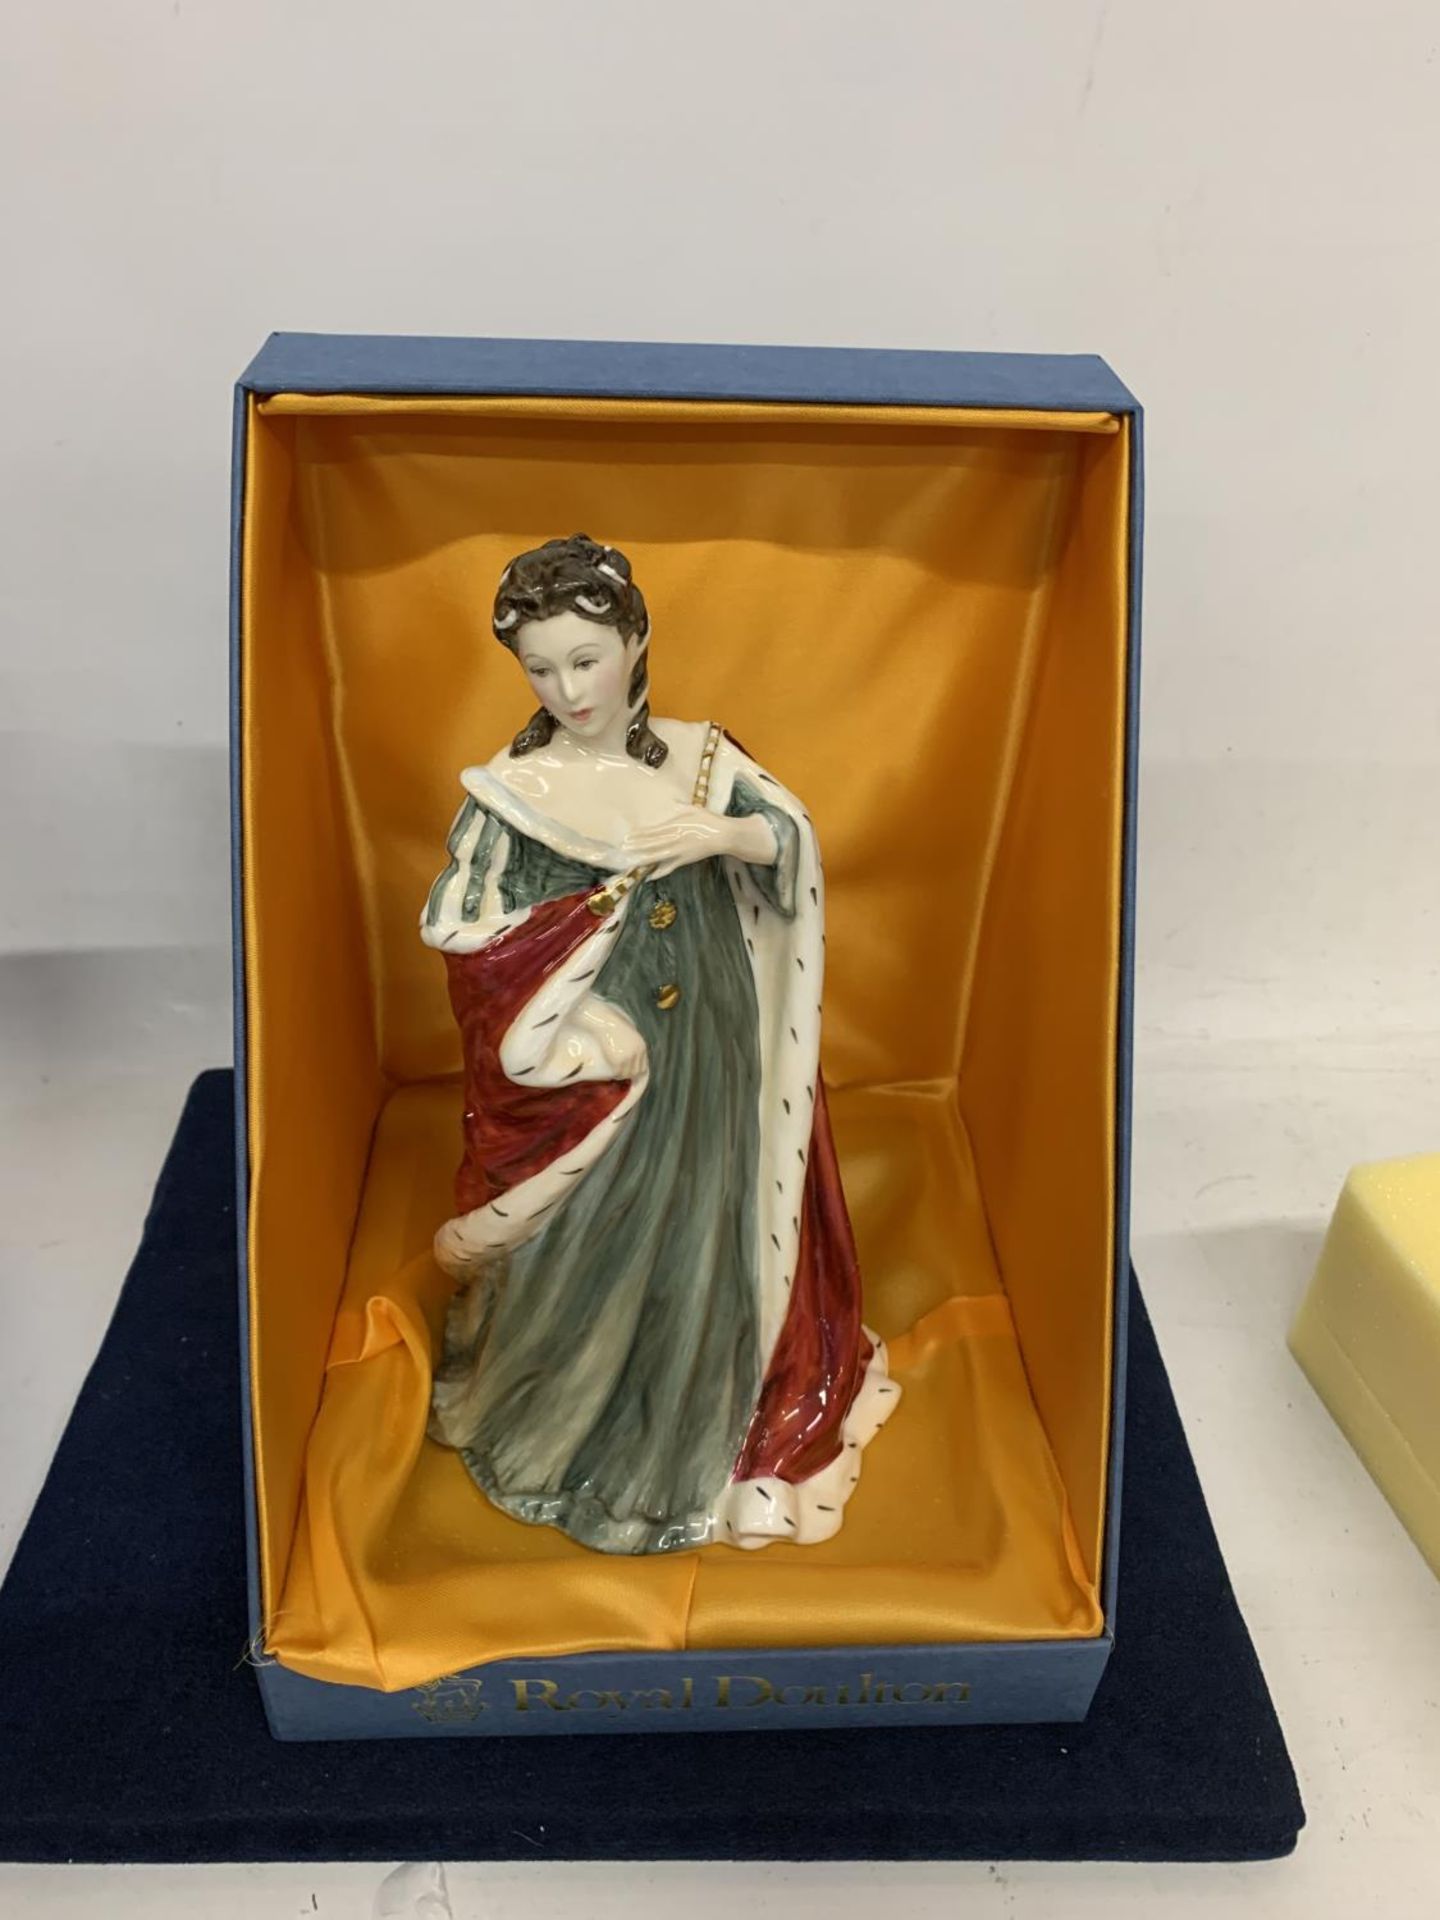 A LIMITED EDITION NO 712/5000 BOXED ROYAL DOULTON FIGURE QUEENS OF THE REALMS QUEEN VICTORIA HN 3125